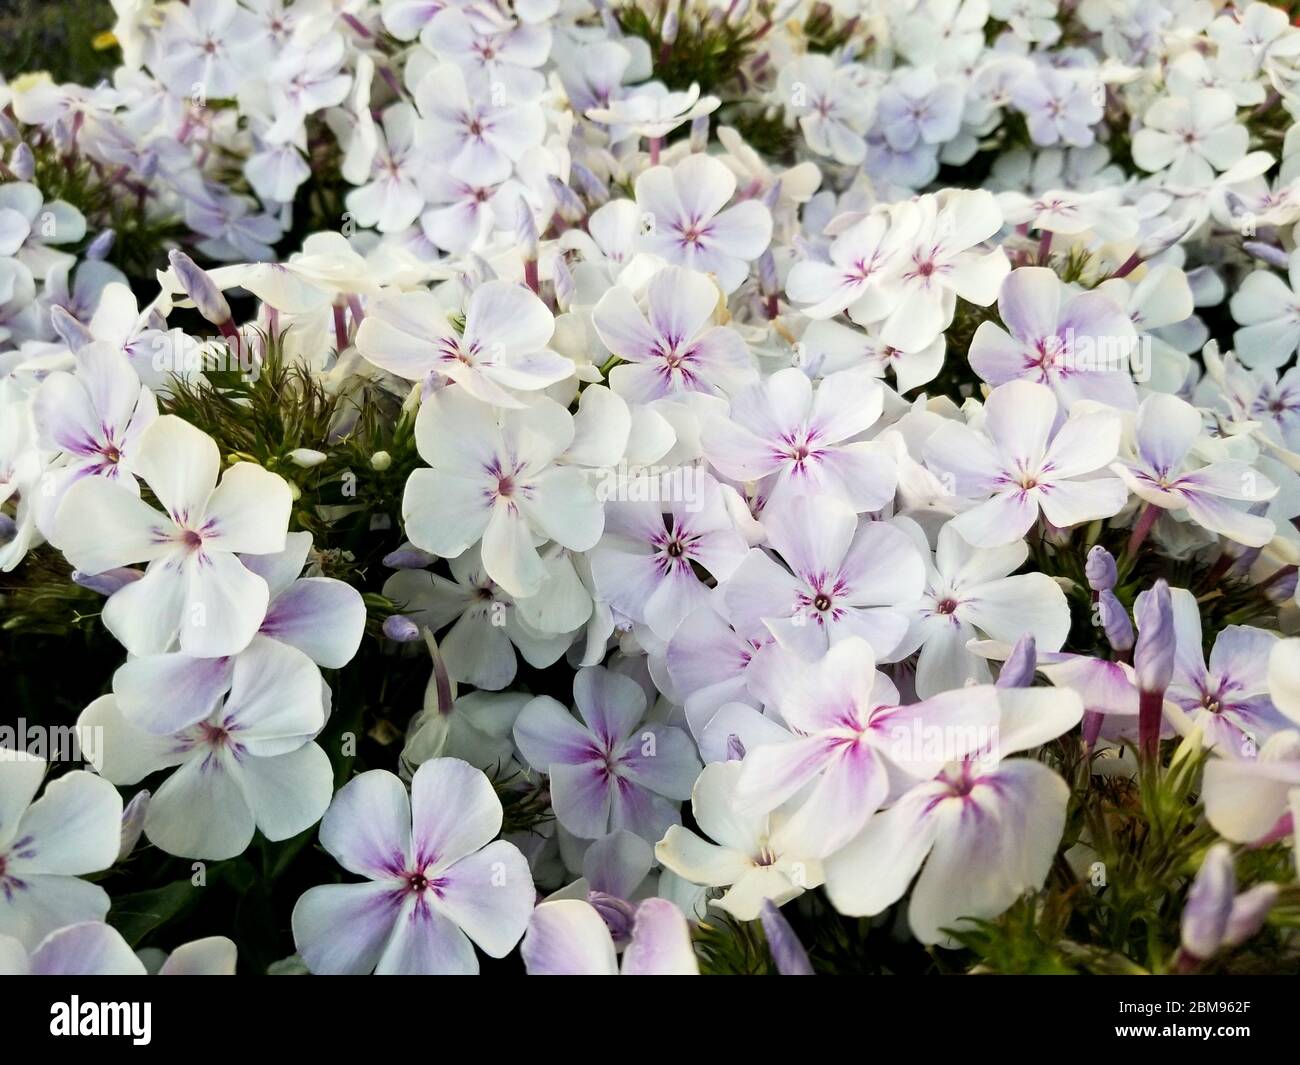 Beautiful white color of Sweet Summer Fantasy Phlox flowers Stock Photo